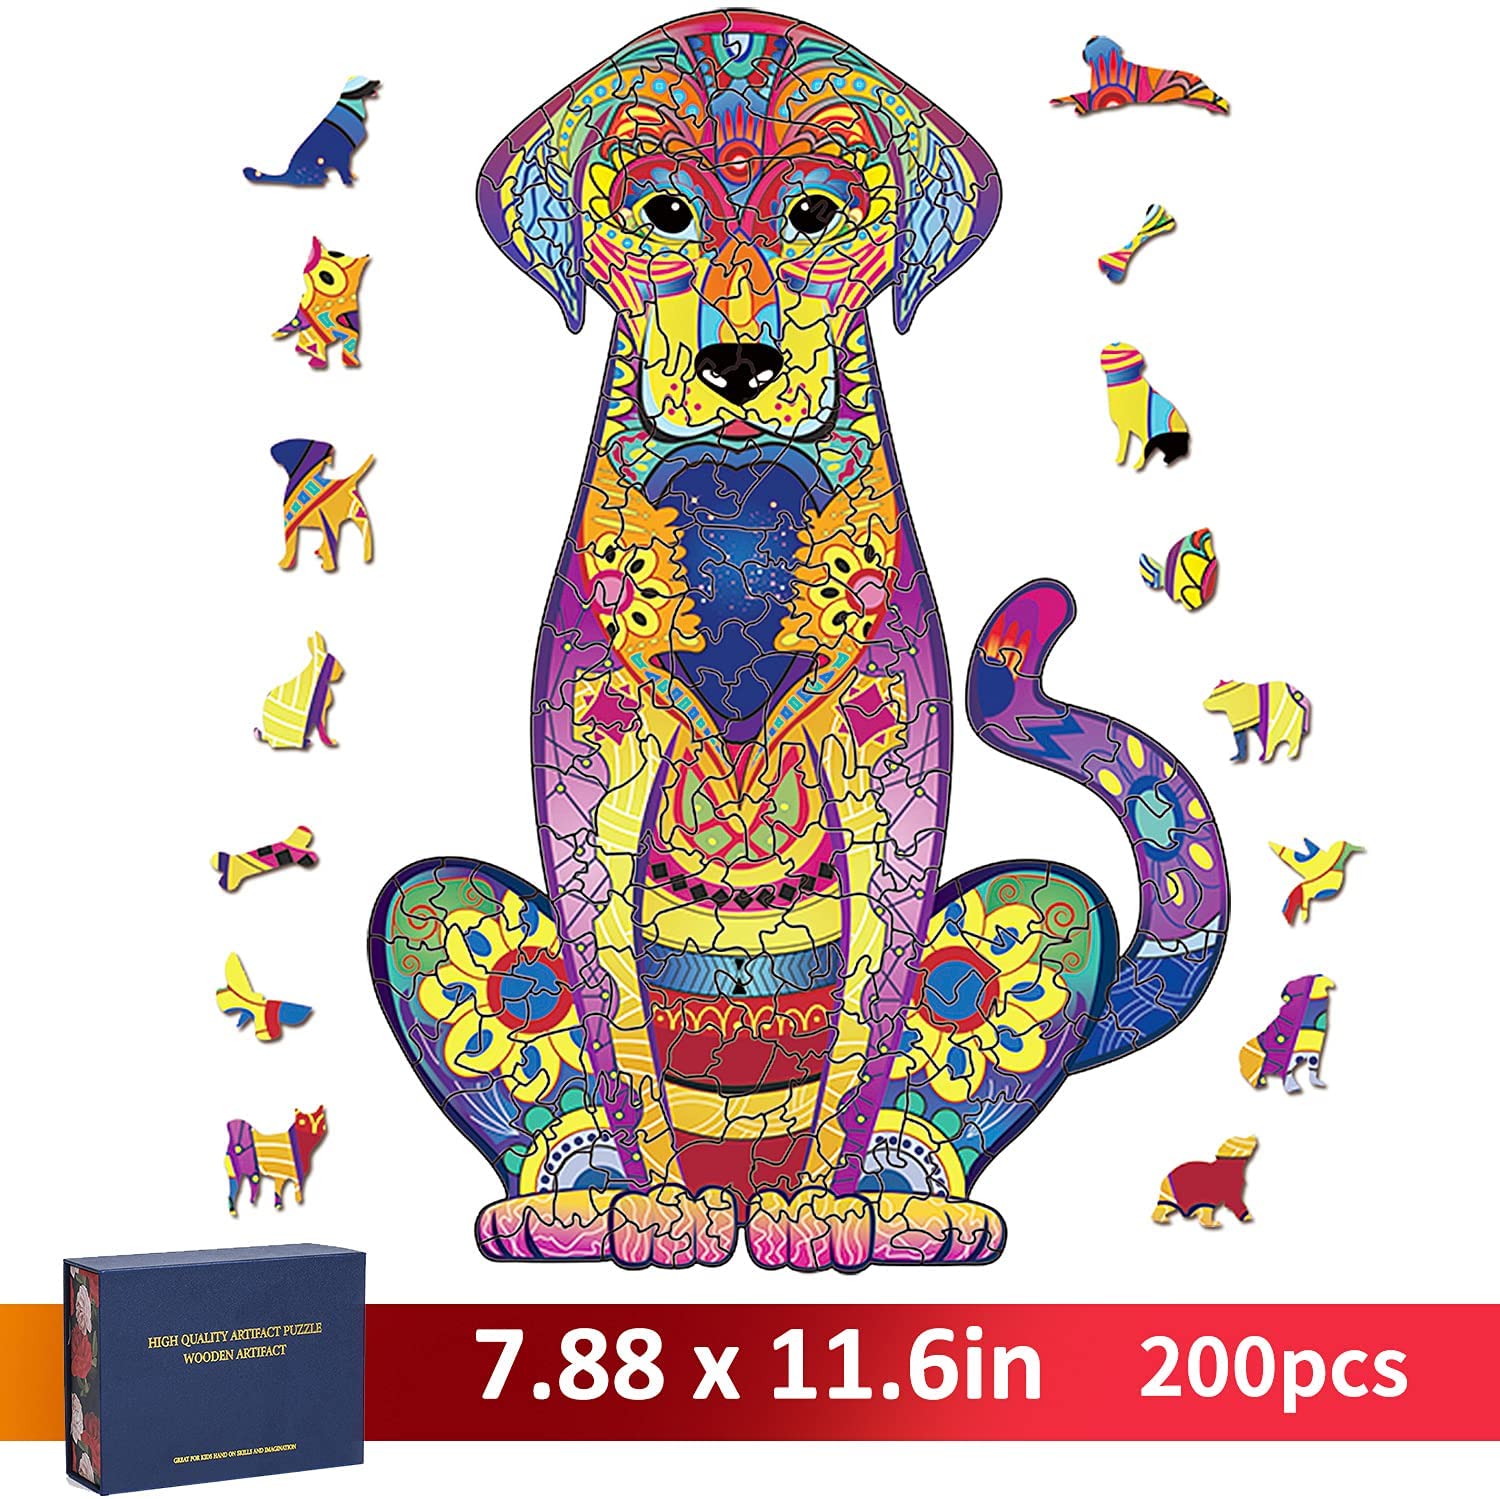 Wooden Jigsaw Puzzles Retriever Dog Animal Shaped Educational Kids Game Toys 